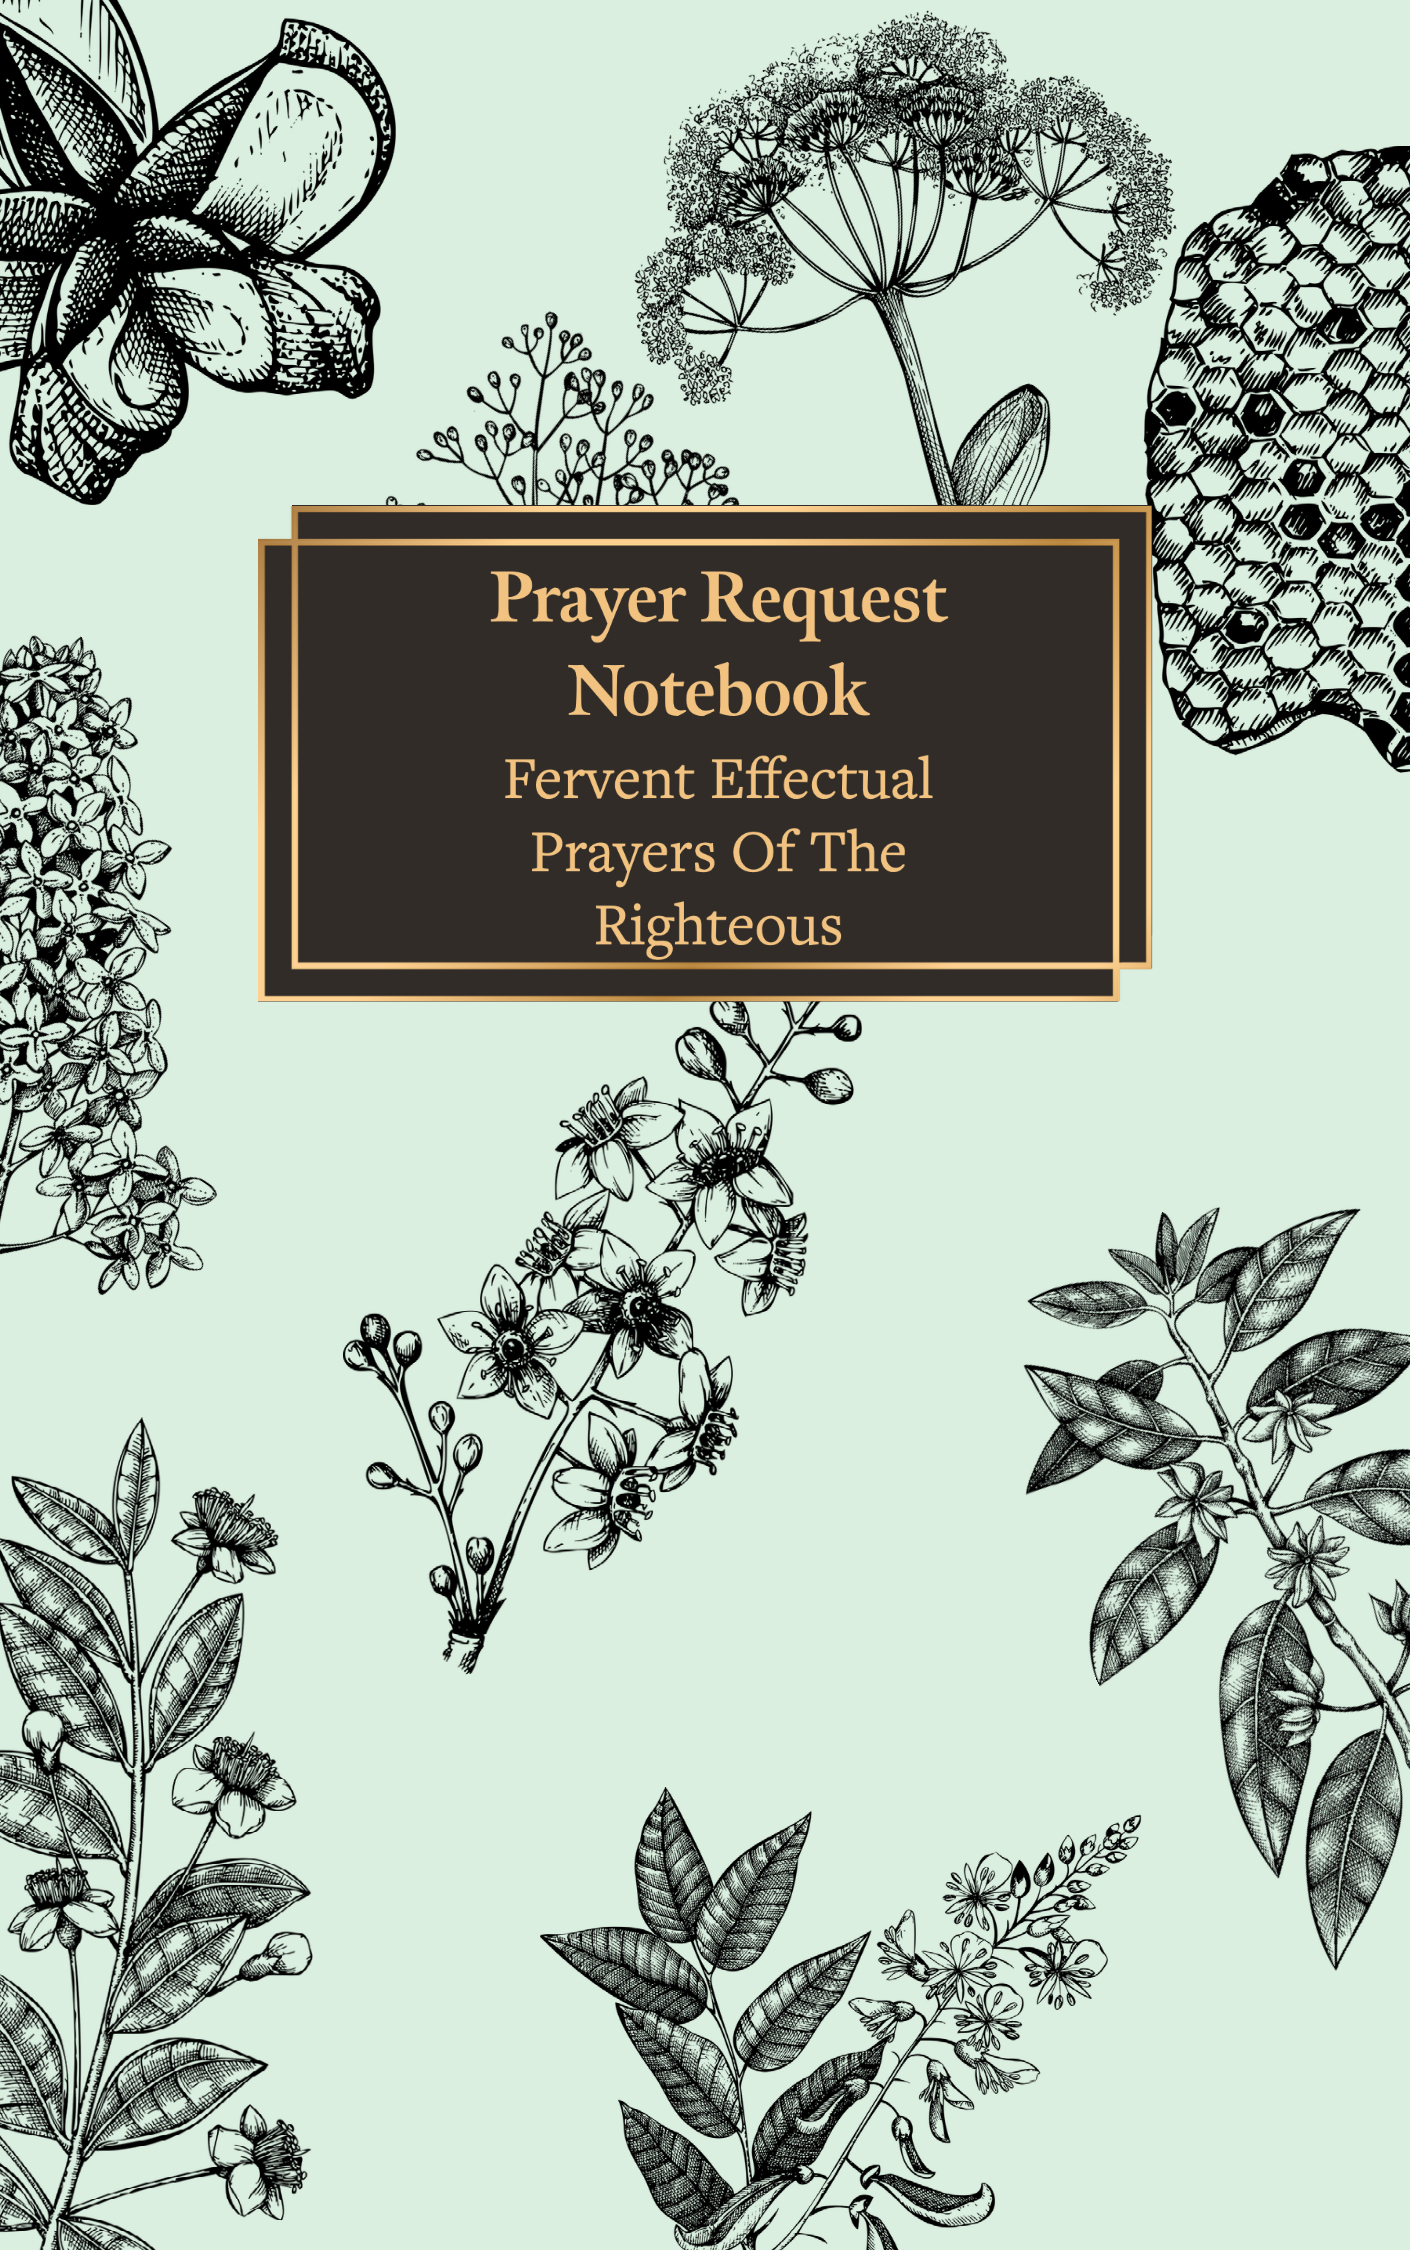 Prayer Request Notebook Fervent Effectual Prayers Of The Righteous